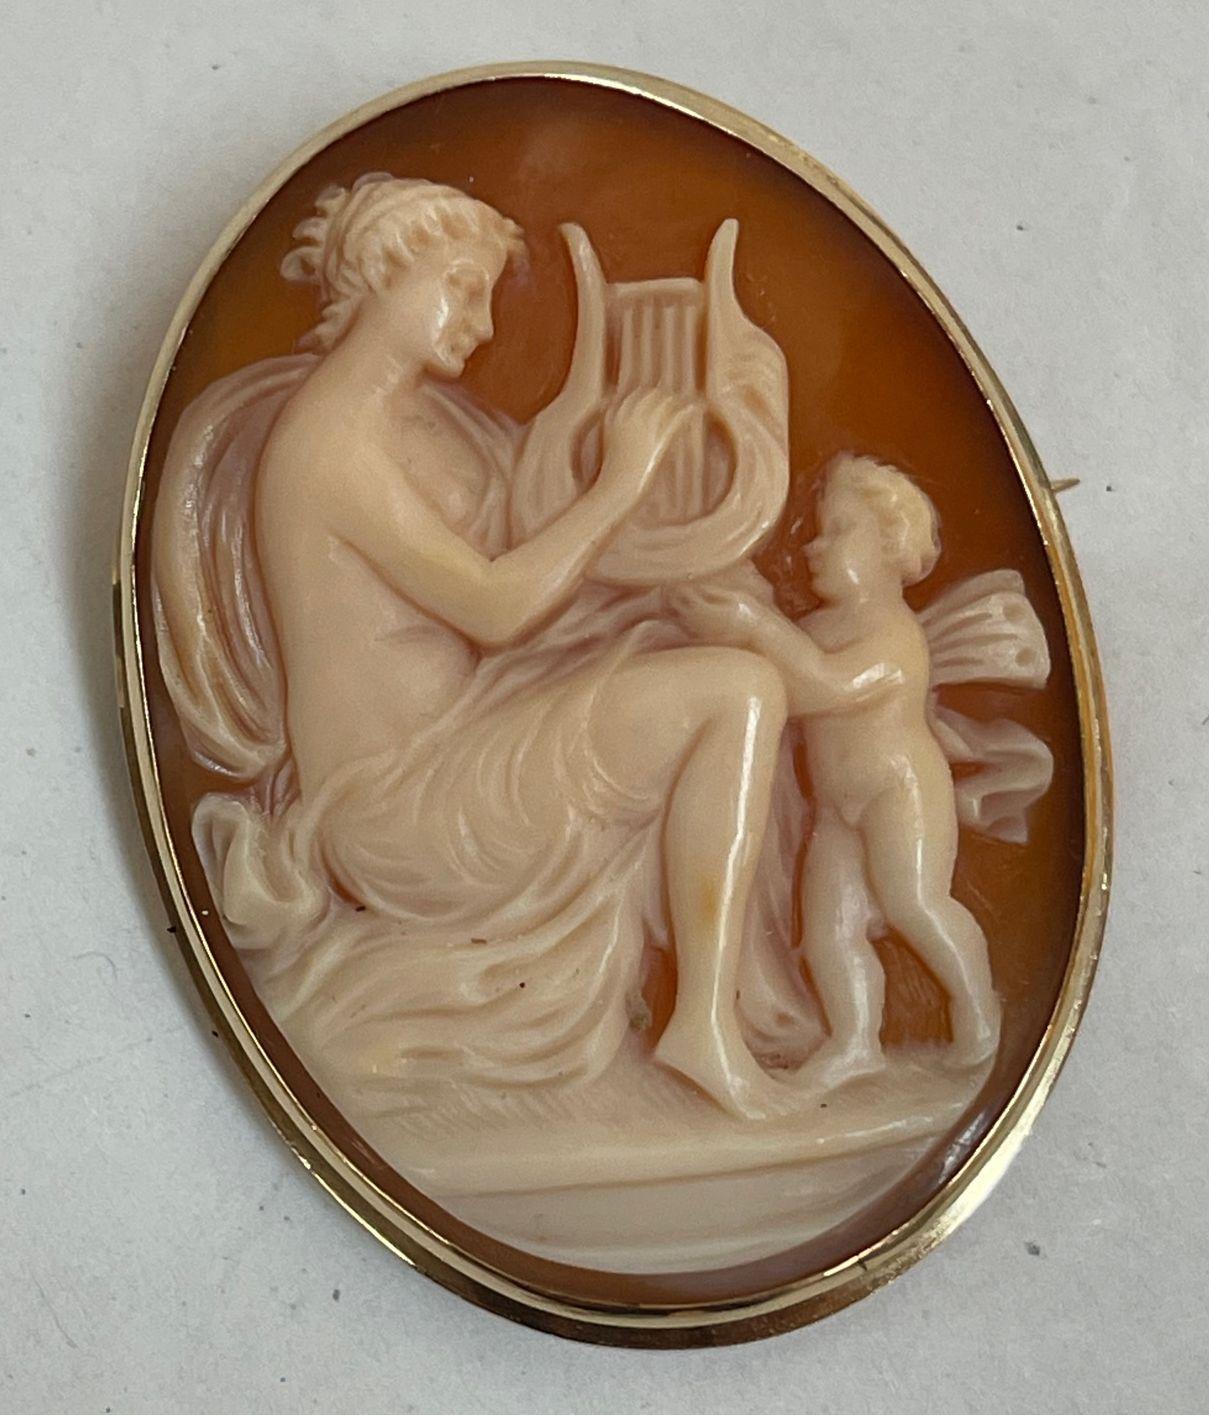 Beautiful Carved Shell Cameo Pin/Pendant. Hand carved scene depicting Aphrodite playing a Lyre with a winged Cherub by her side. DIVINE MUSICAL HARMONY. Hand set in 14K Yellow Gold frame. Rendered with remarkable detail and warmth, so unusual to